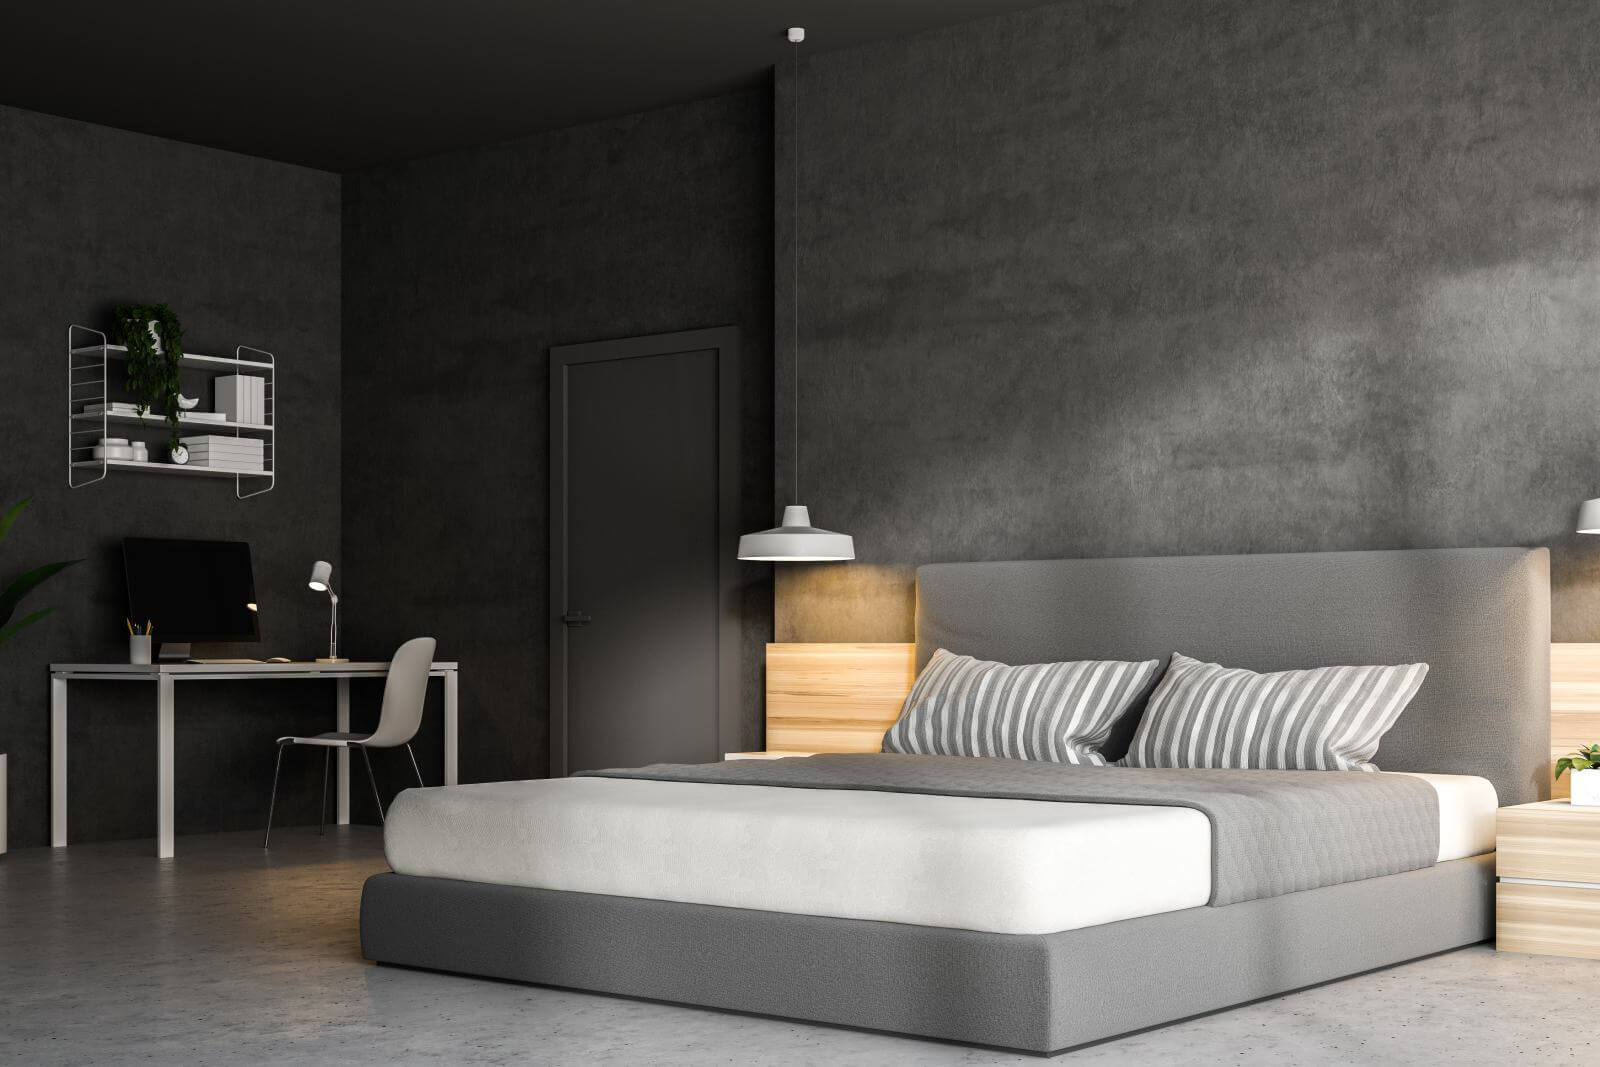 Corner of a modern bedroom with gray walls, a concrete floor, a double bed and a home office with a computer. 3d rendering mock up